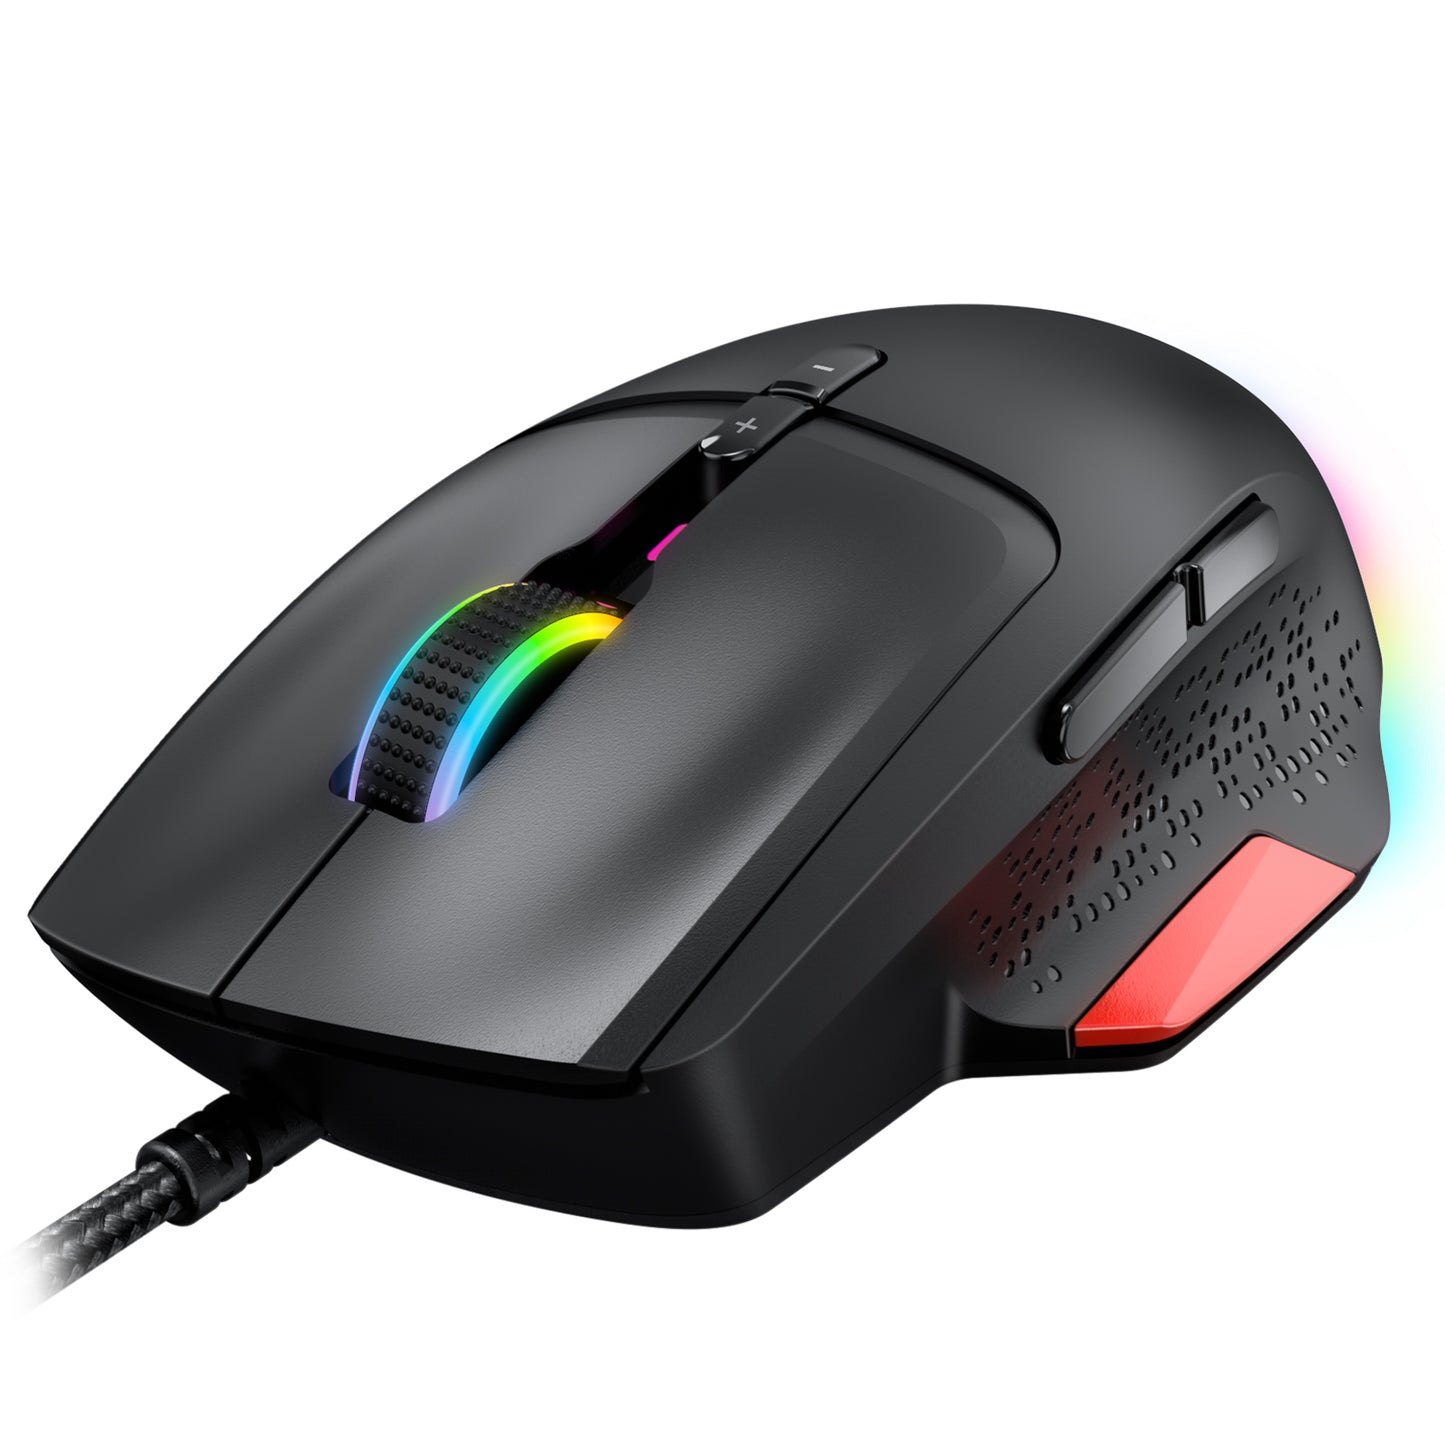 EKSA Gamer Lux EM600 Advanced Wired Gaming Mouse Customizable RGB, 12000 DPI, 8 Programmable Buttons and Lightweight Design